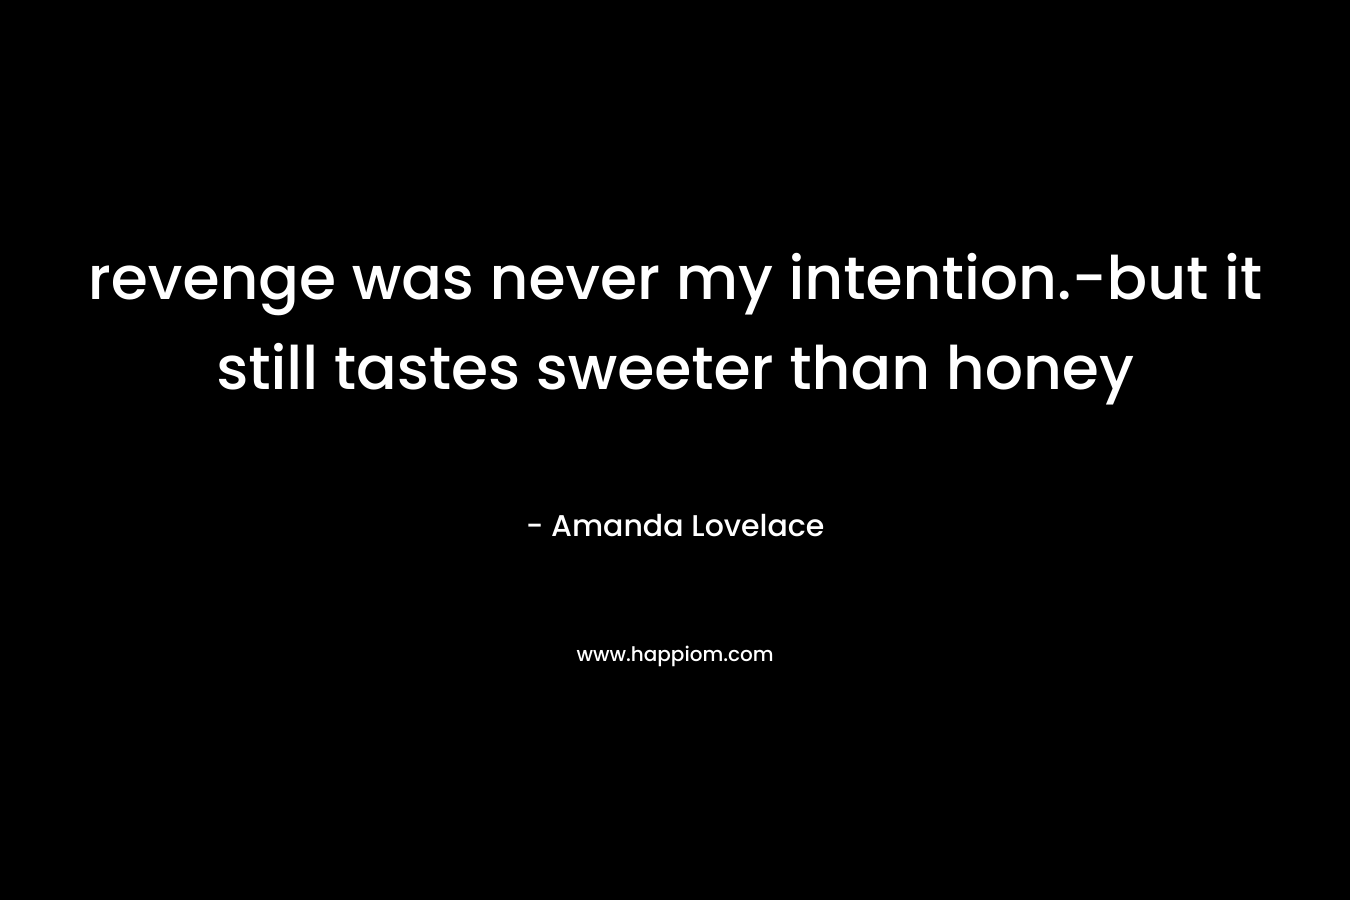 revenge was never my intention.-but it still tastes sweeter than honey